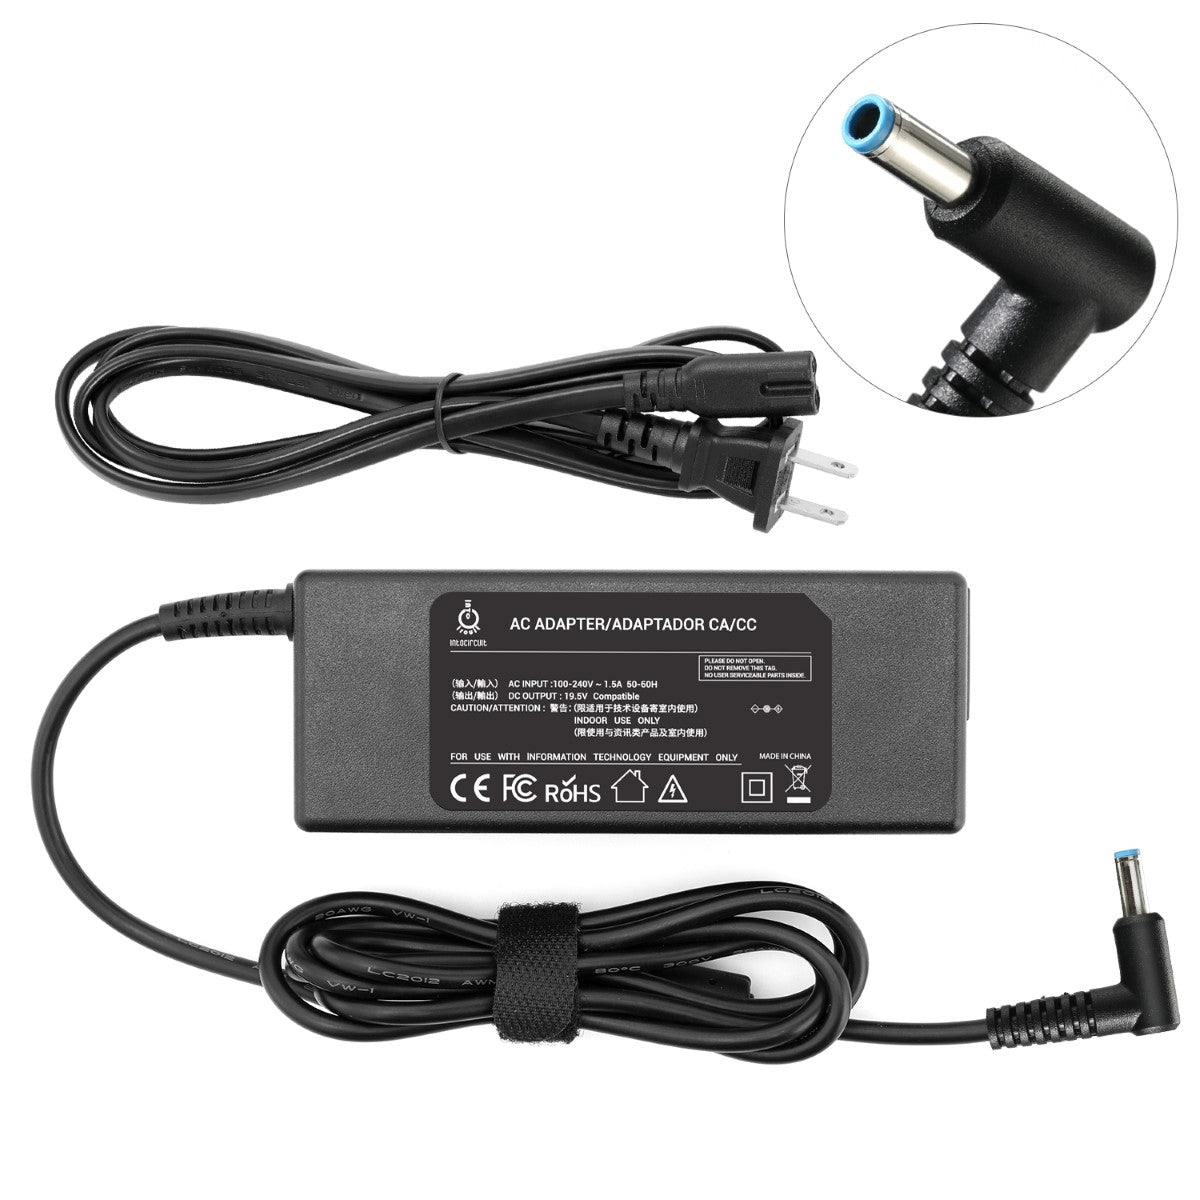 Charger for HP 15-df1075nr Spectre x360 Laptop